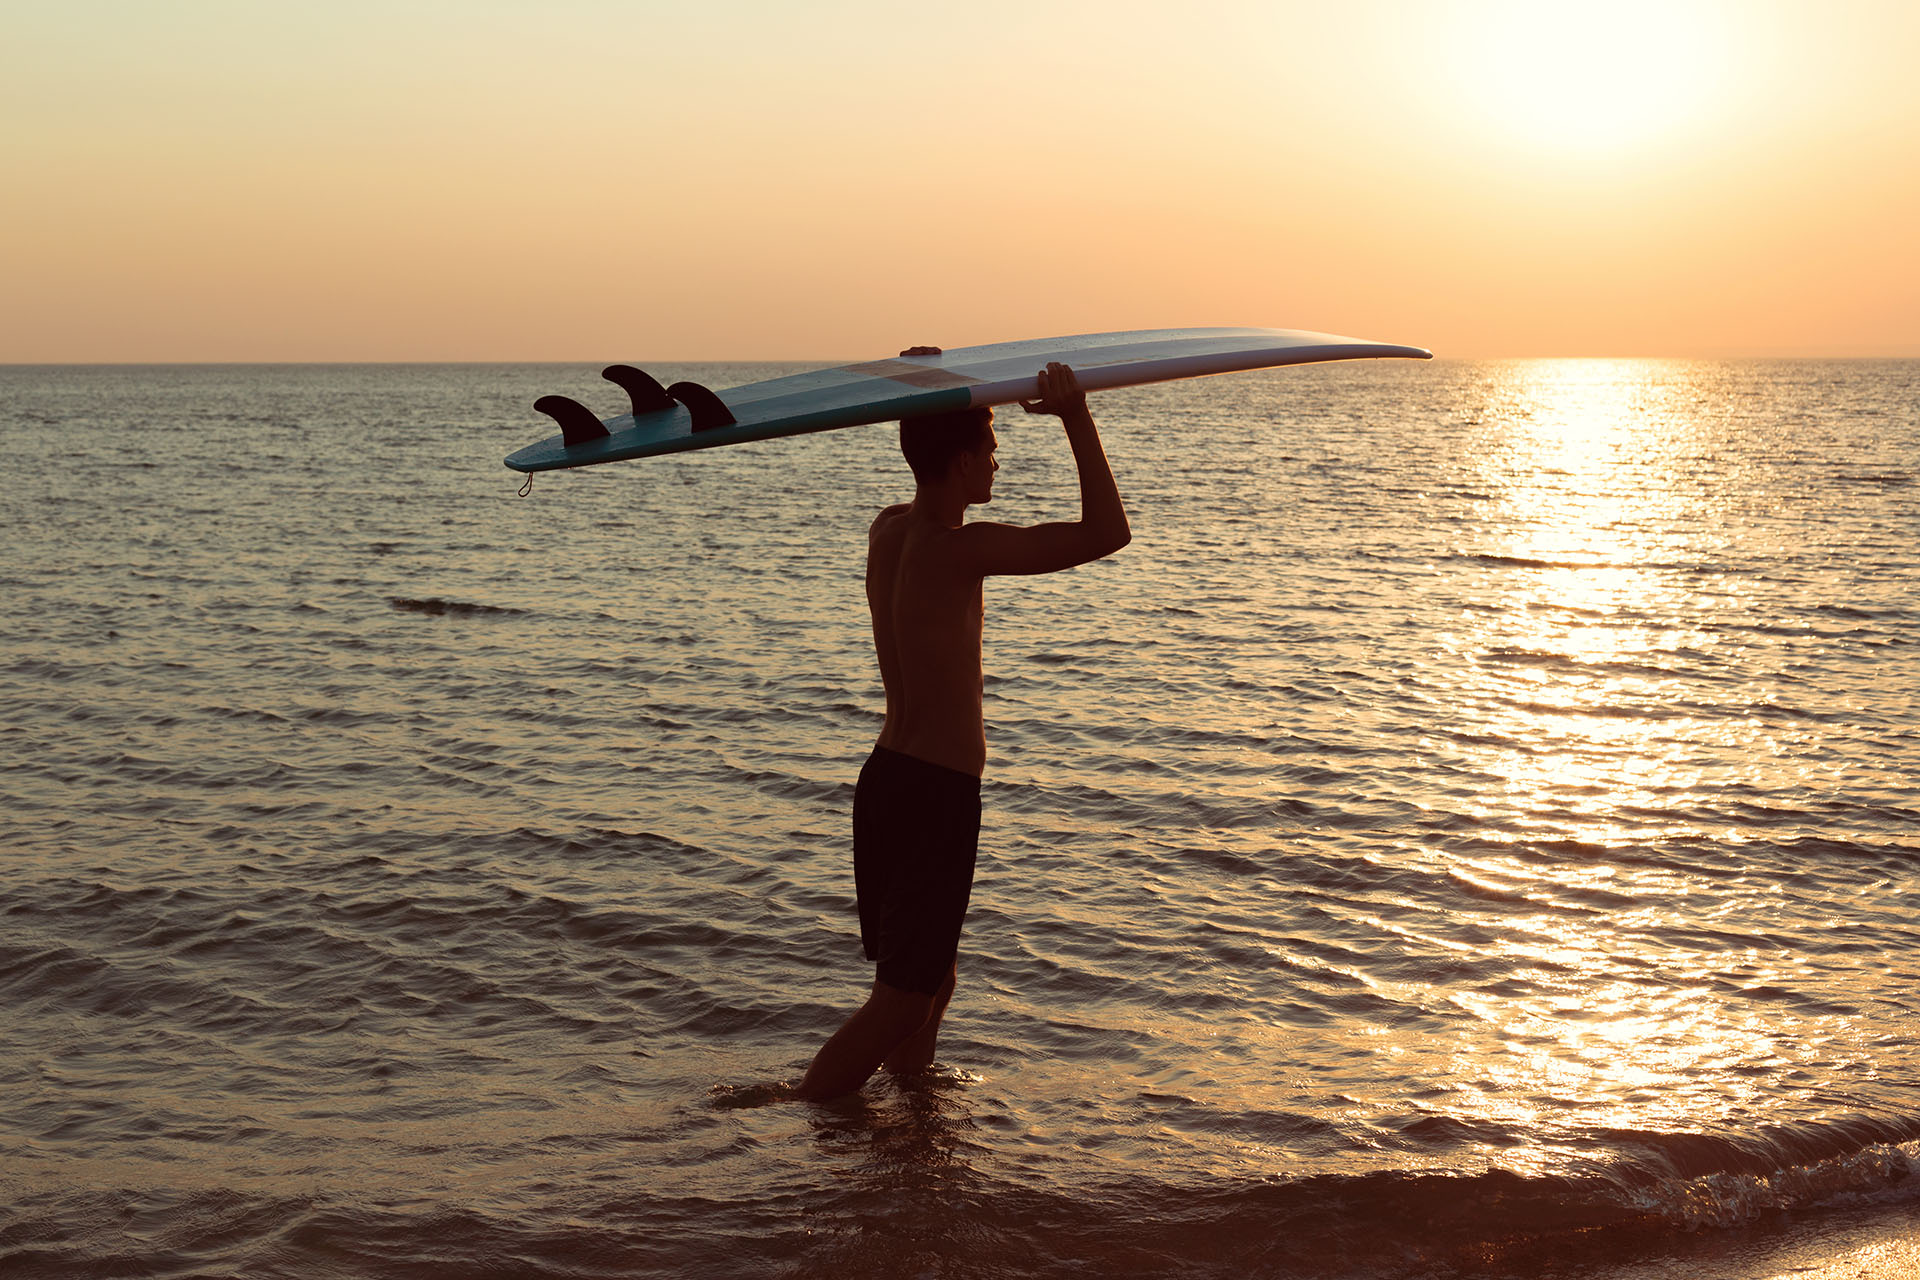 A surfer at sunset.